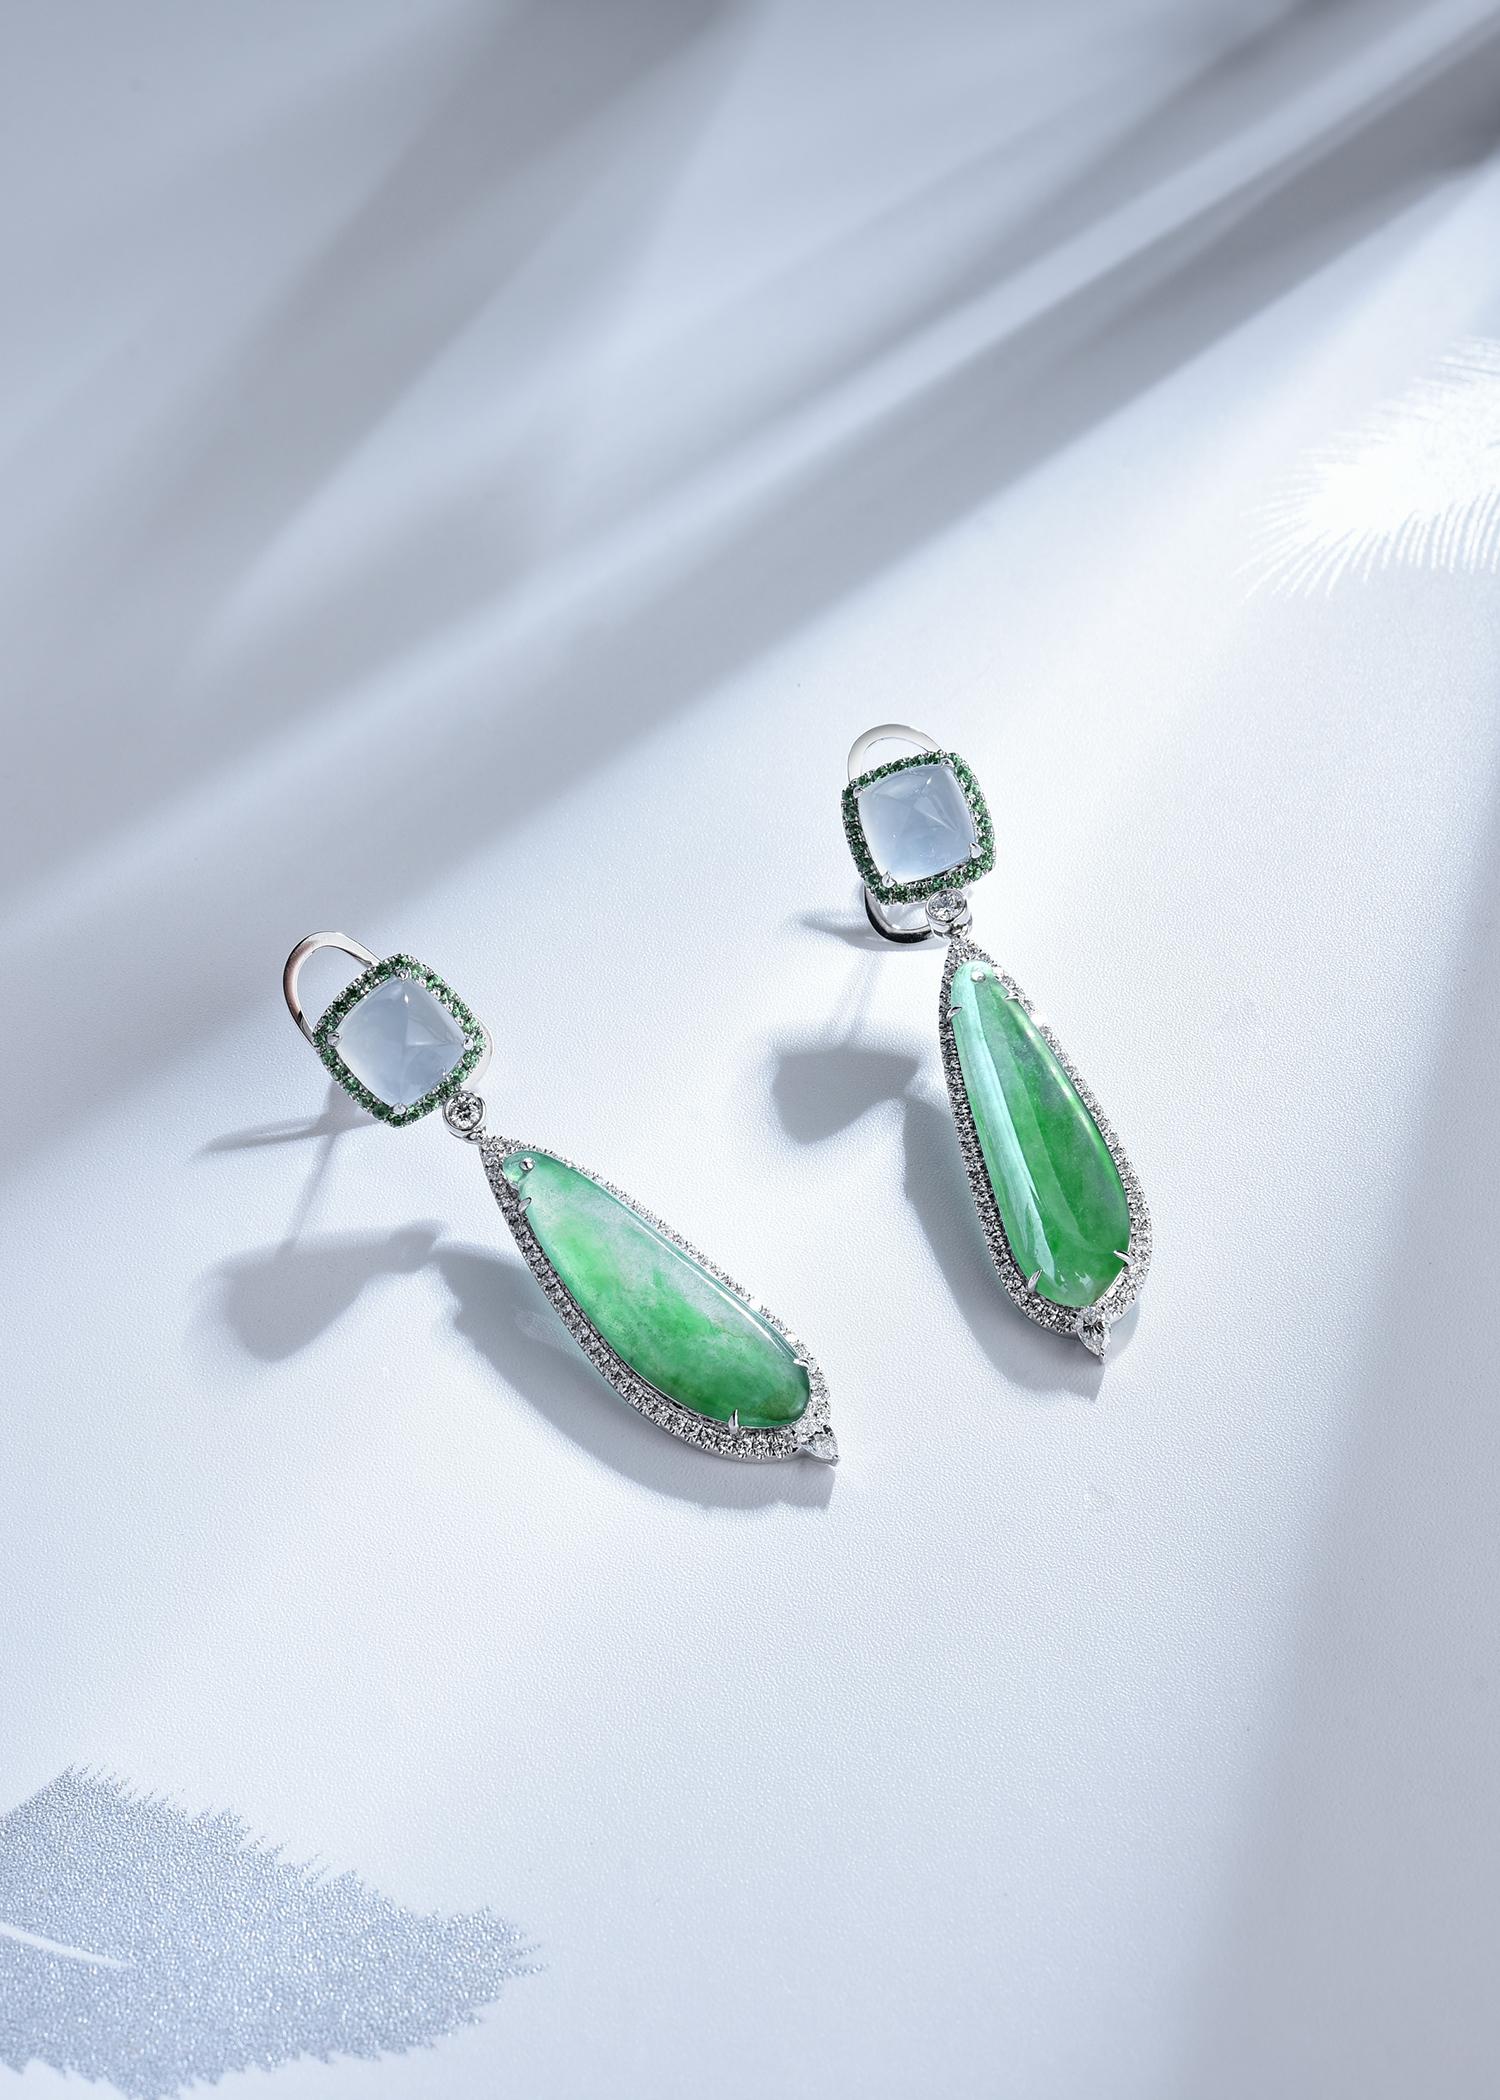 This is a very interesting Jadeite cabochon earring, it consists of both near colourless and green colour jadeite. The concenpt behind this earring is all about contrasting. Cabochon to brilliant cut, green to no colour, high dome cabochon to flat